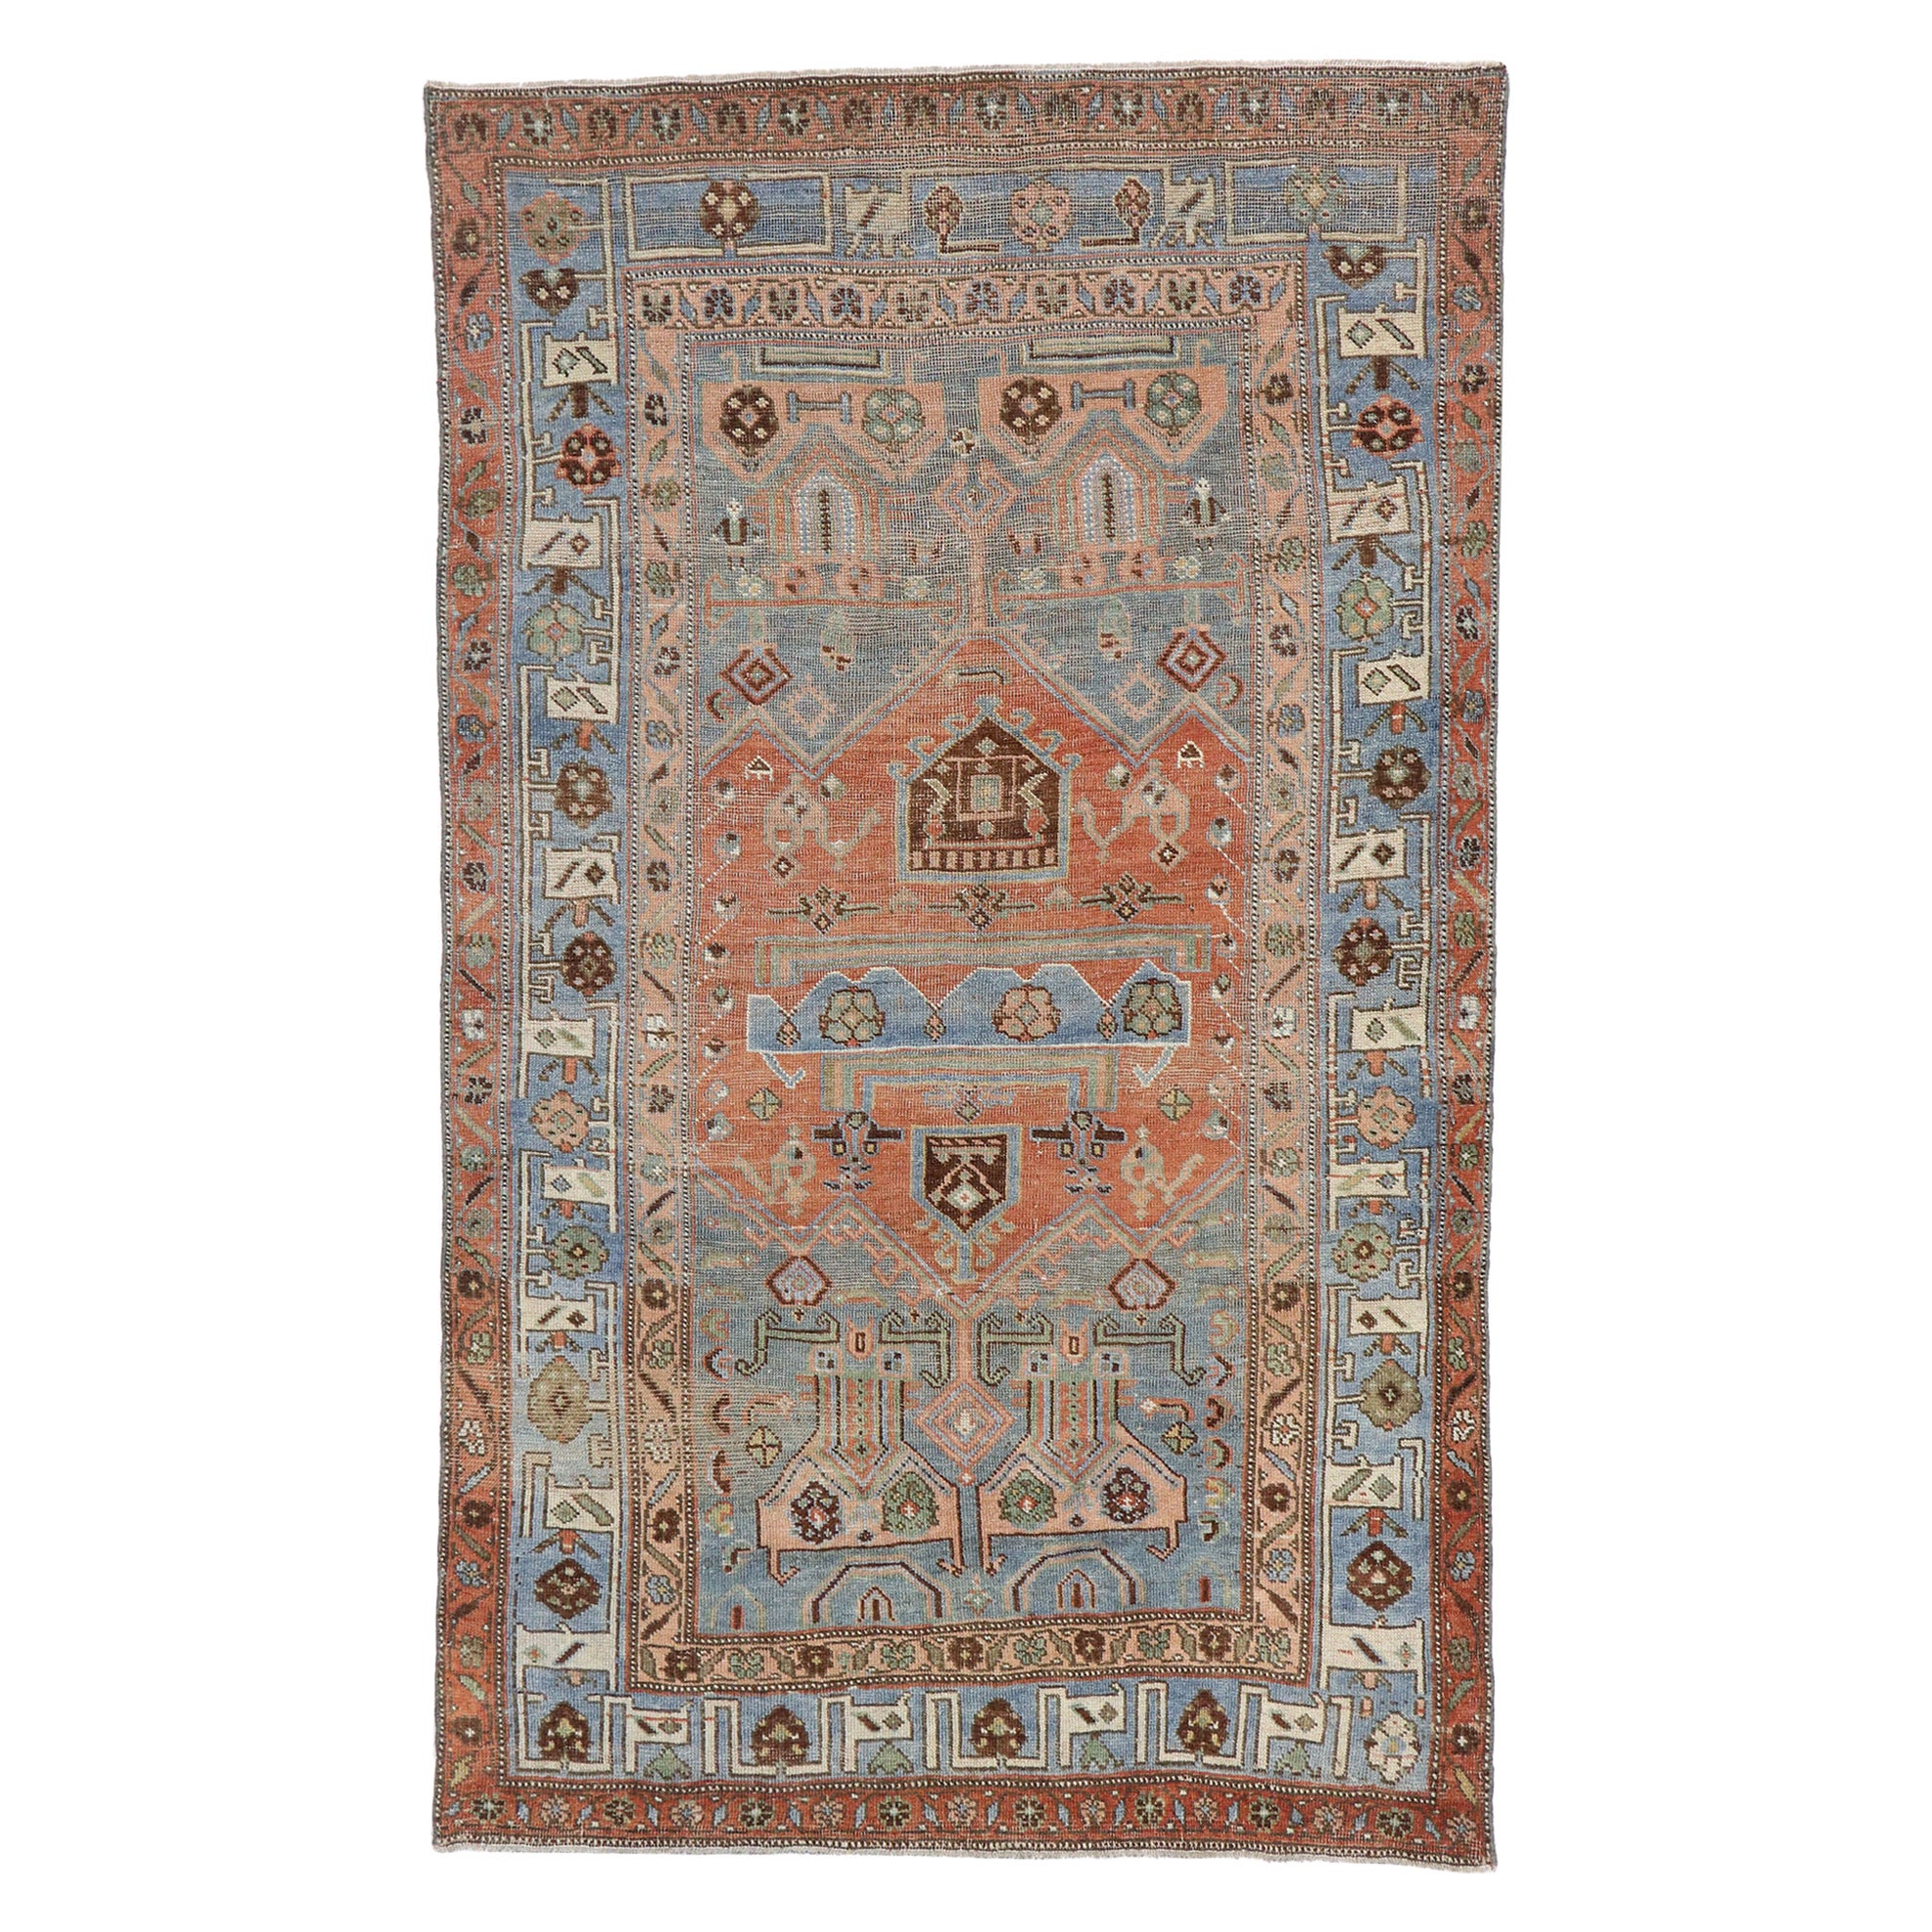 Antique Persian Bijar Rug with Modern Rustic Tribal Style